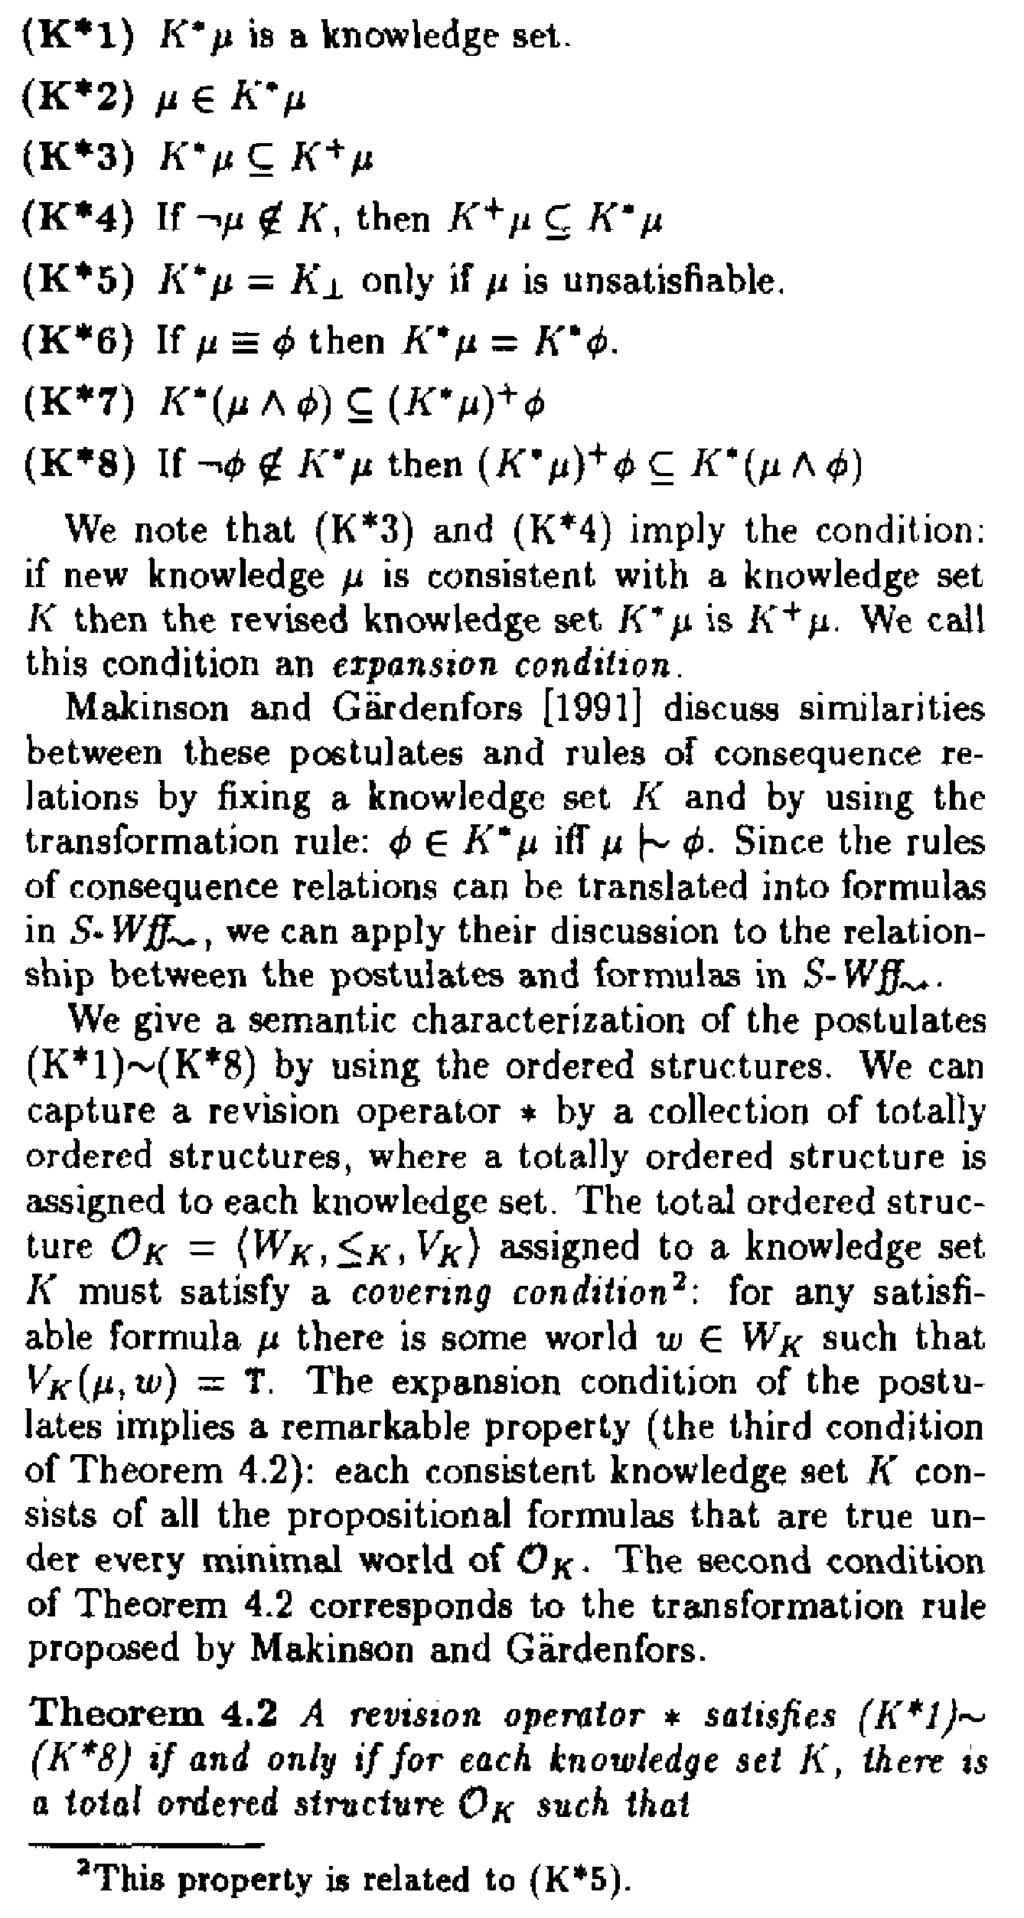 that is inconsistent with the current KB is obtained. Alchourron, Gardenfors and Makinson [1985] propose rationality postulates for the revision operation.